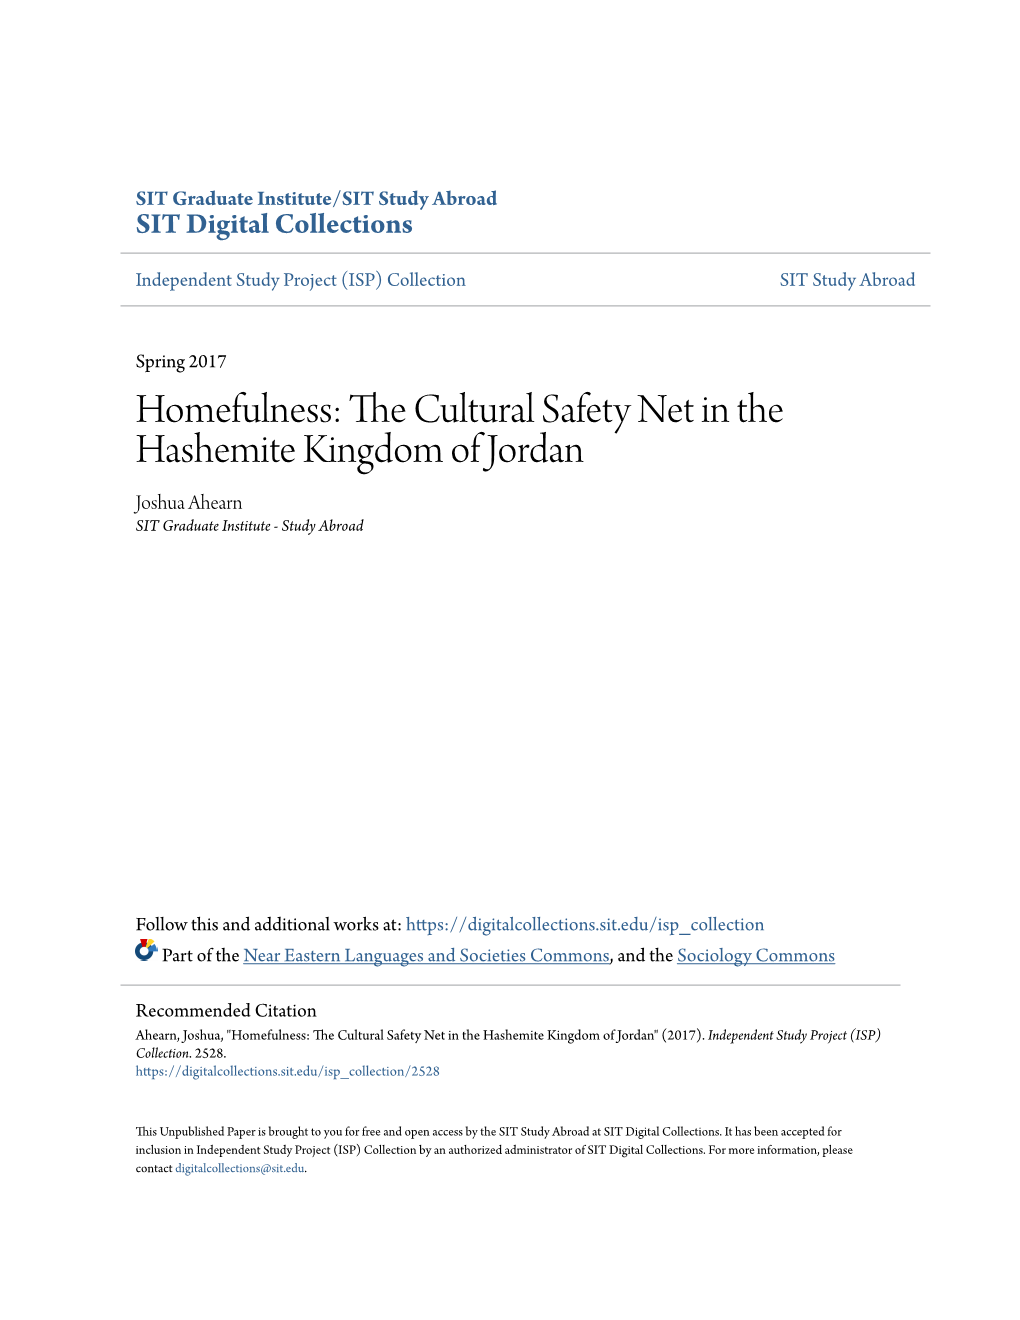 Homefulness: the Cultural Safety Net in the Hashemite Kingdom of Jordan